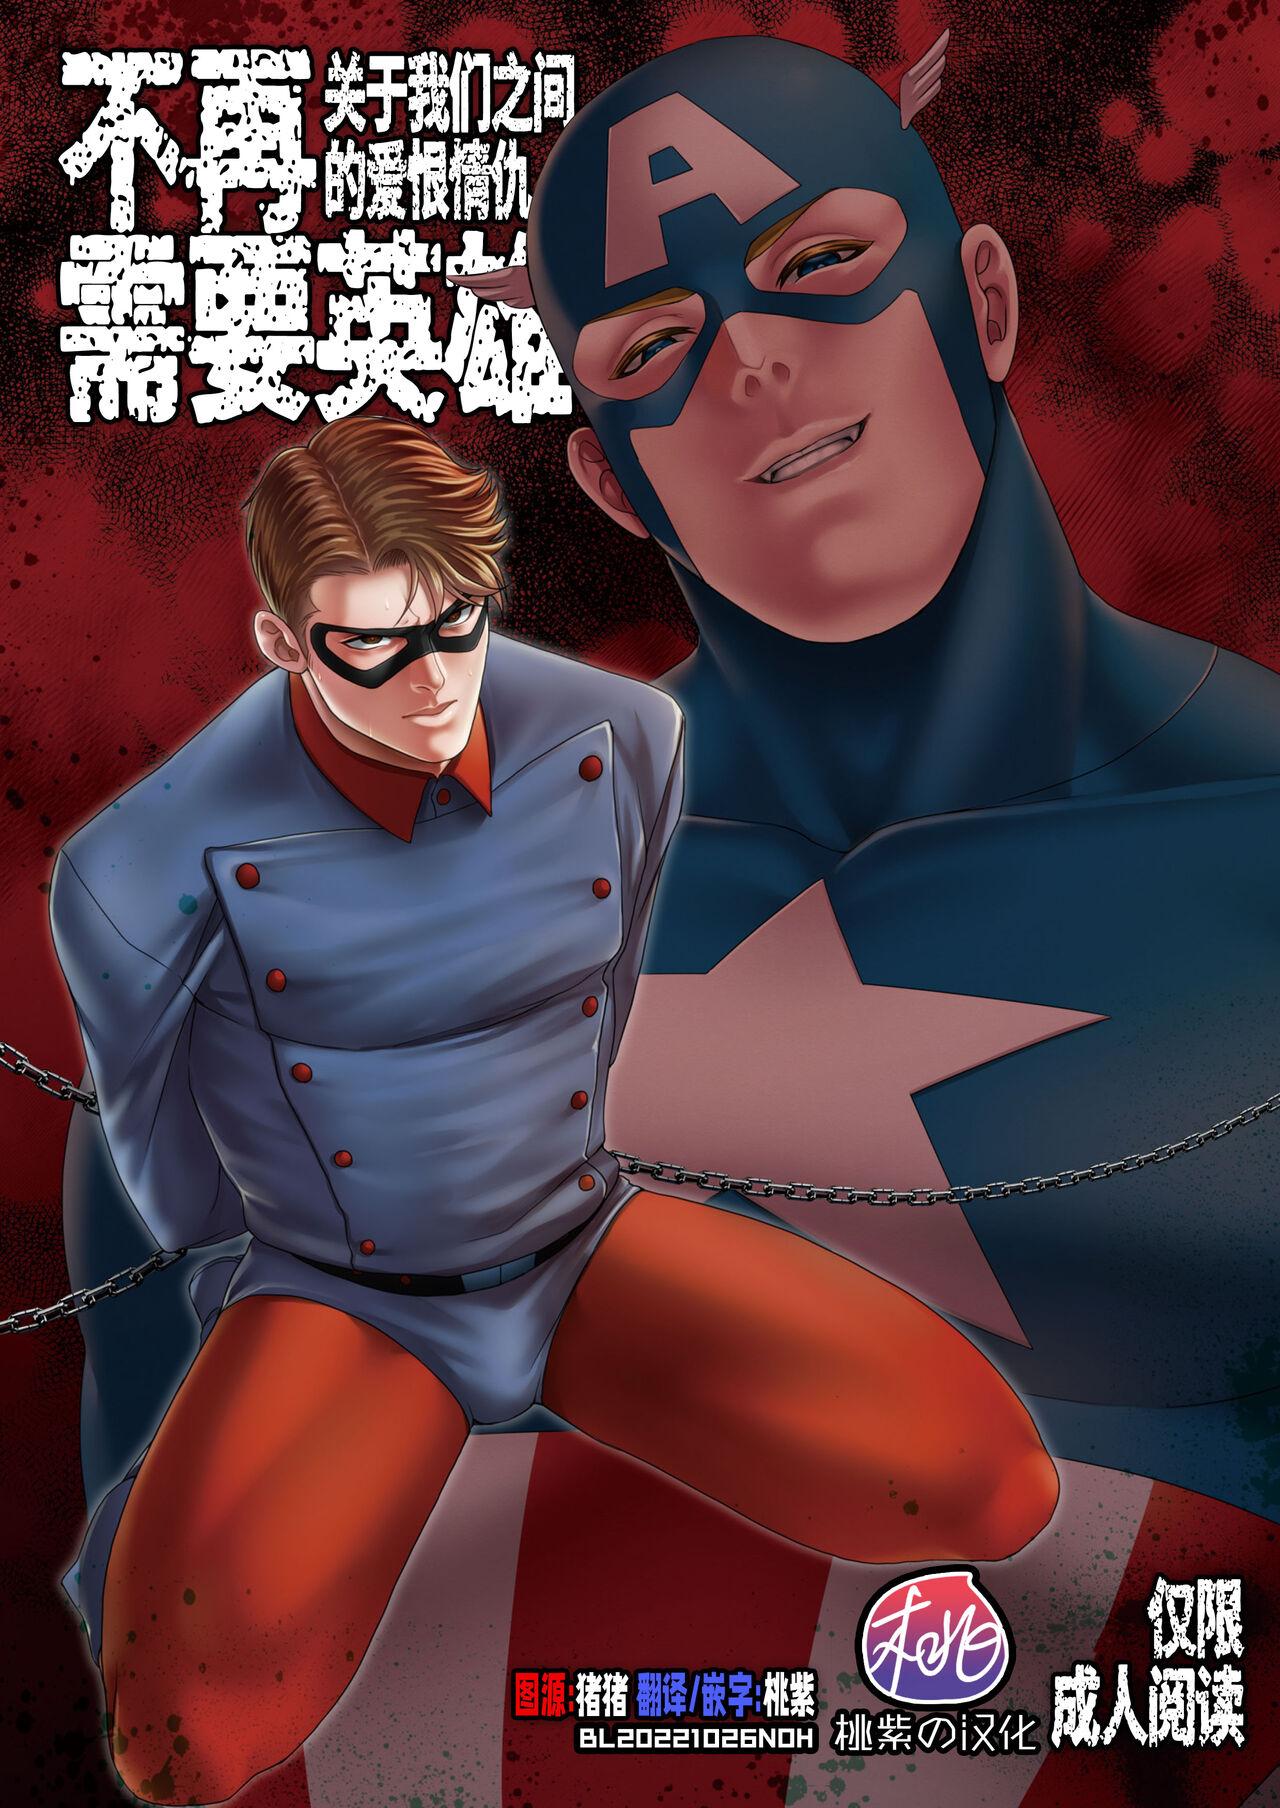 American NO HEROES Our love and hate relationship | 不再需要英雄 - 关于我们之间的爱恨情仇 - Avengers Fake Tits - Picture 1